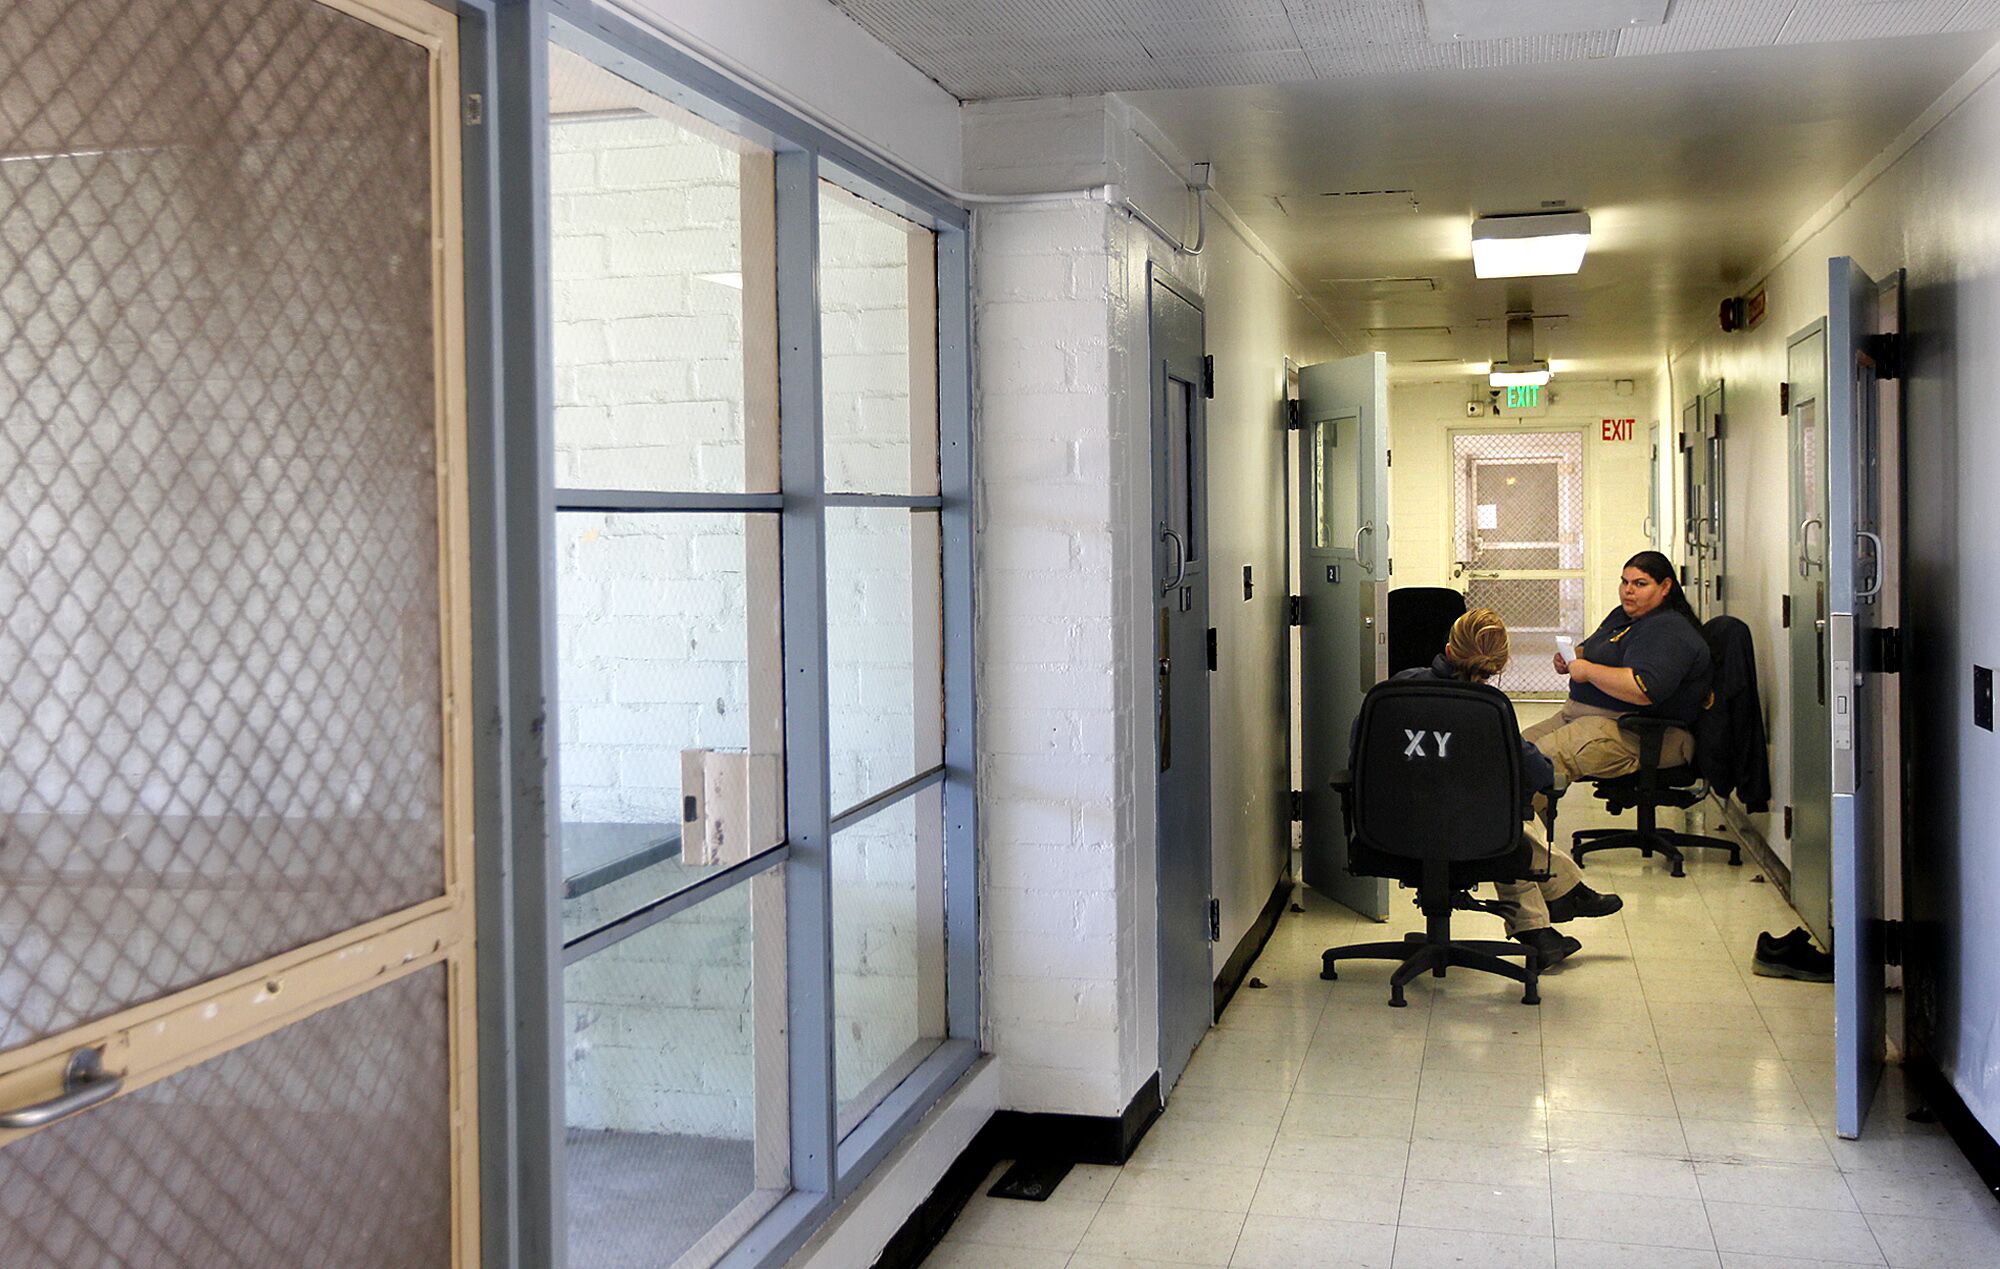 Two officers seated in a hallway of a detention center